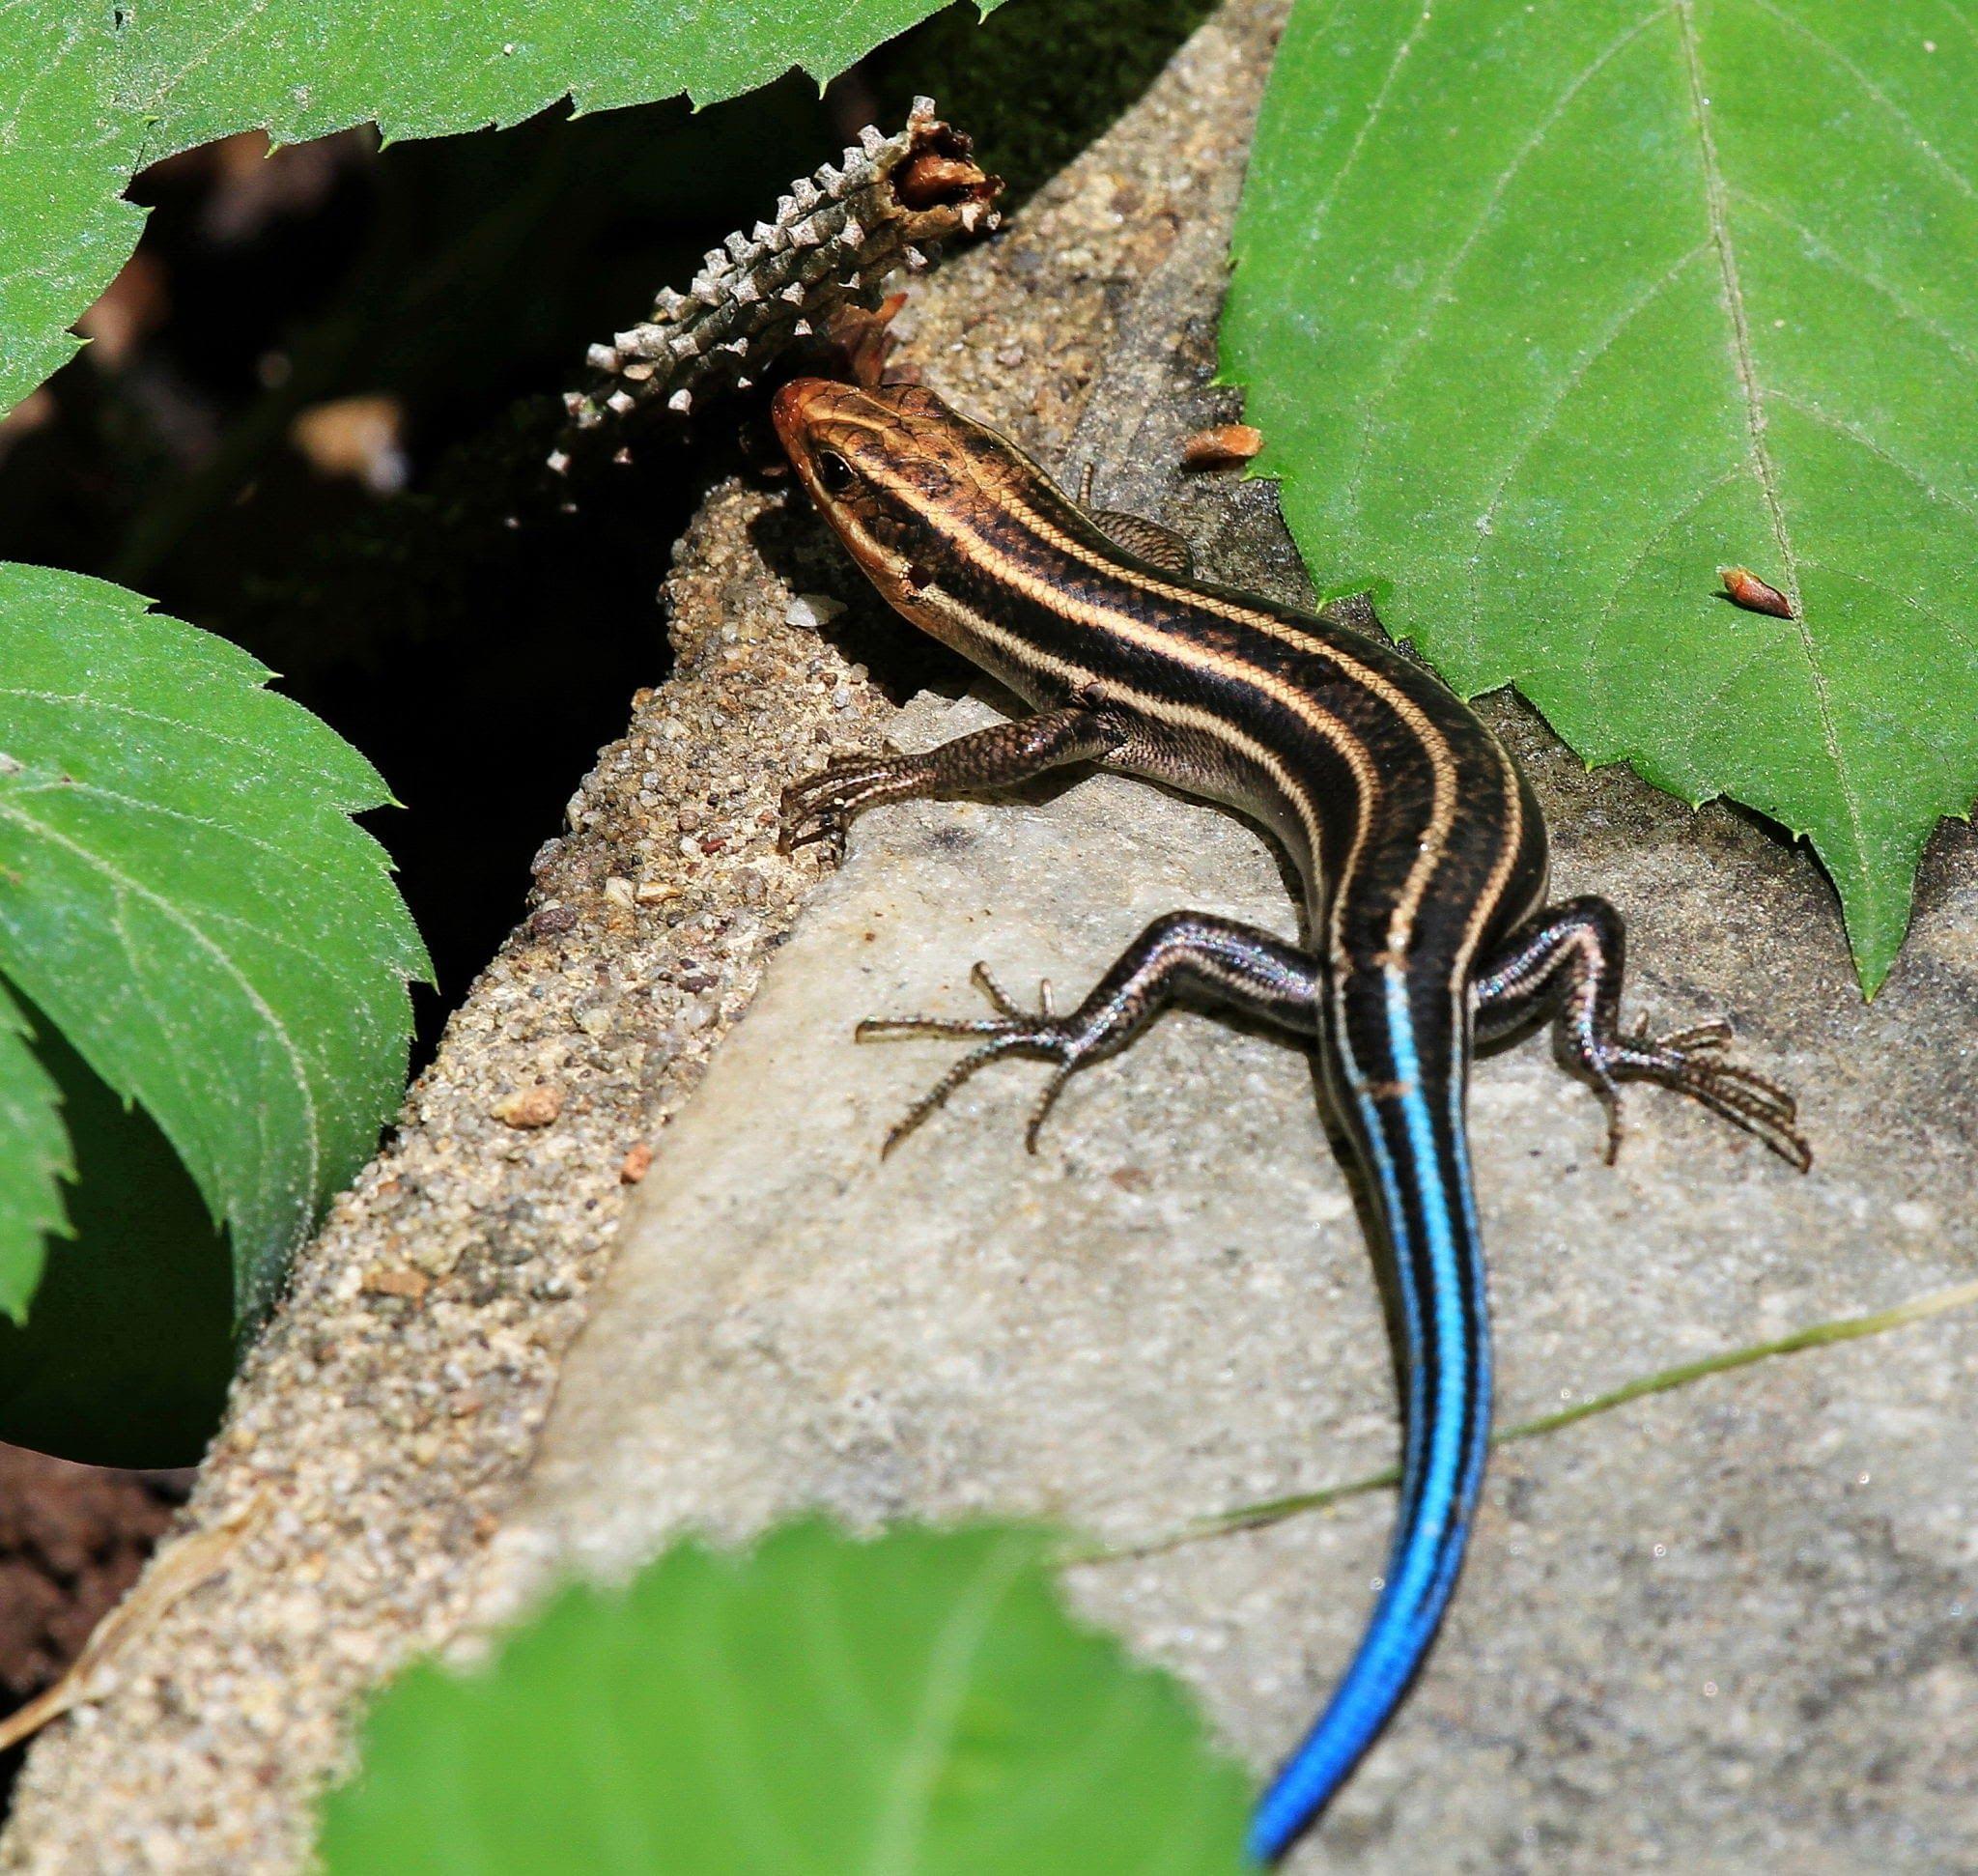 The Blue-Tailed Skink.